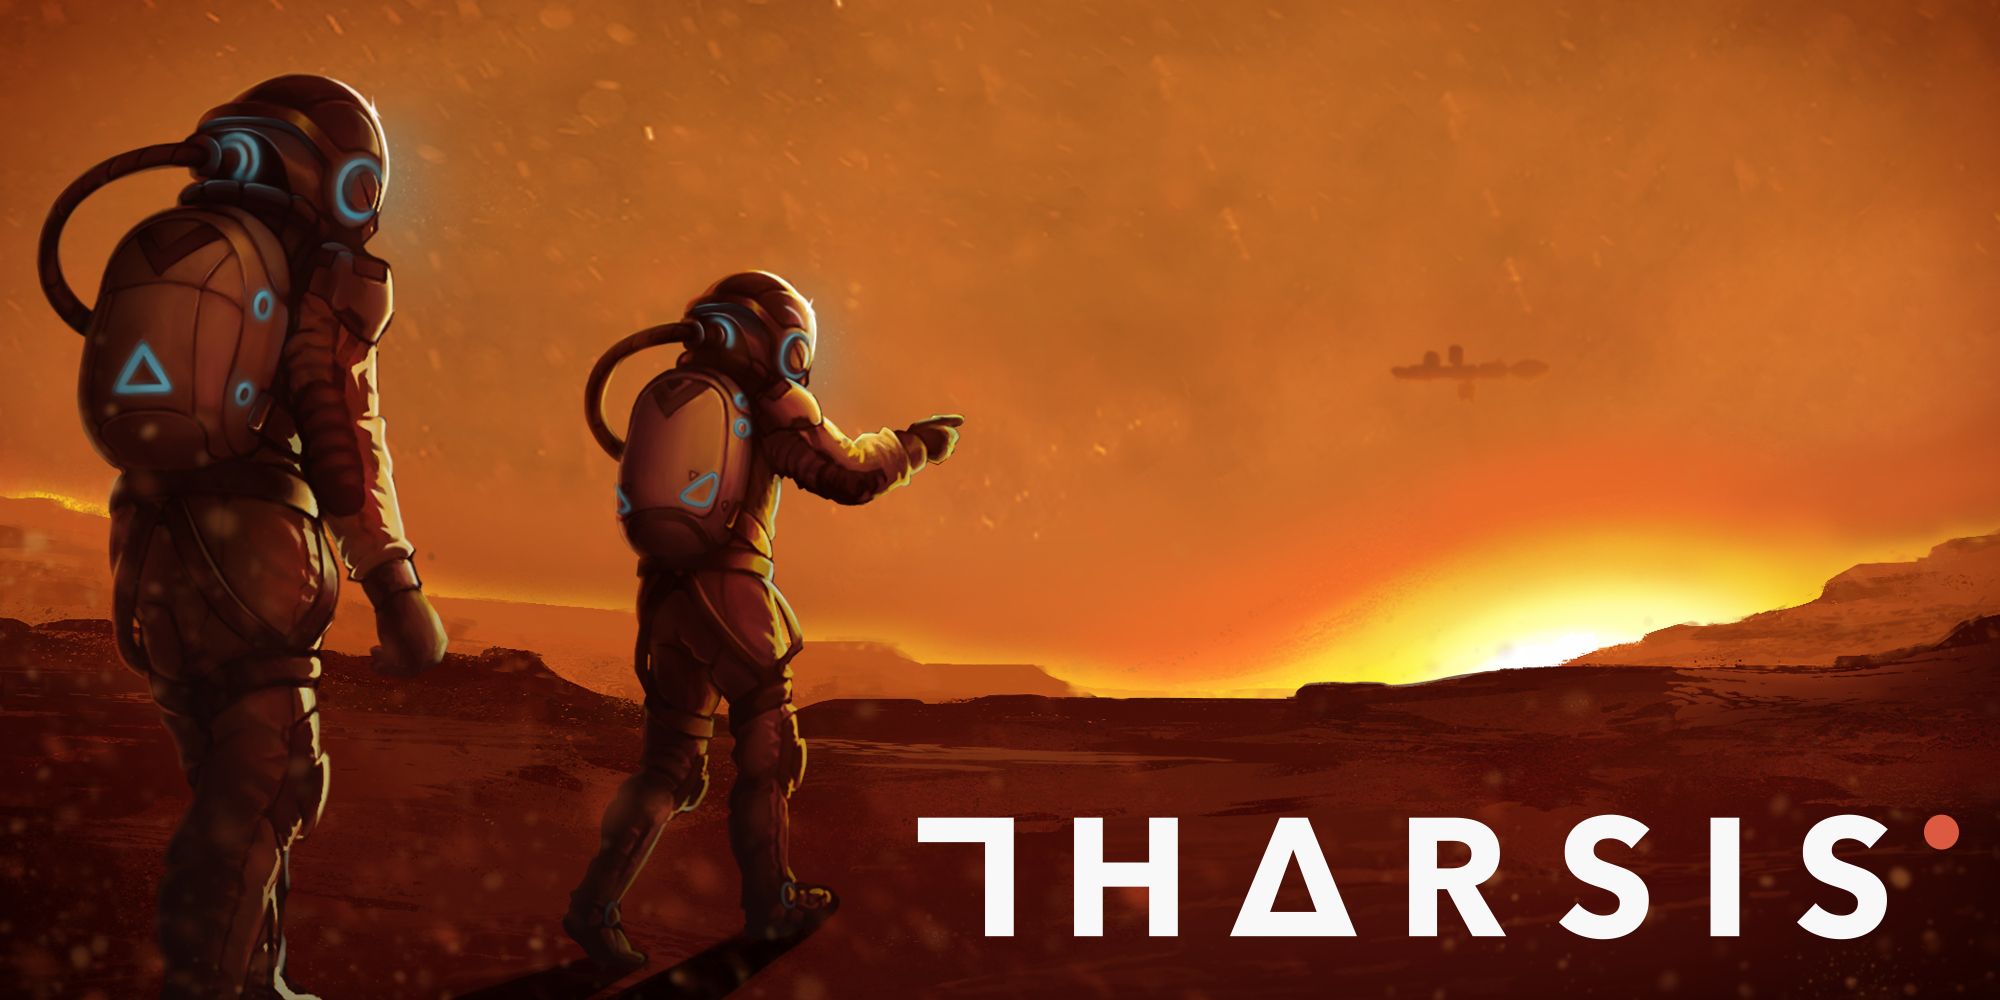 A piece of promotional art for the game Tharsis featuring two astronauts walking on Mars pointing at a distant ship with the game's logo in the bottom right corner